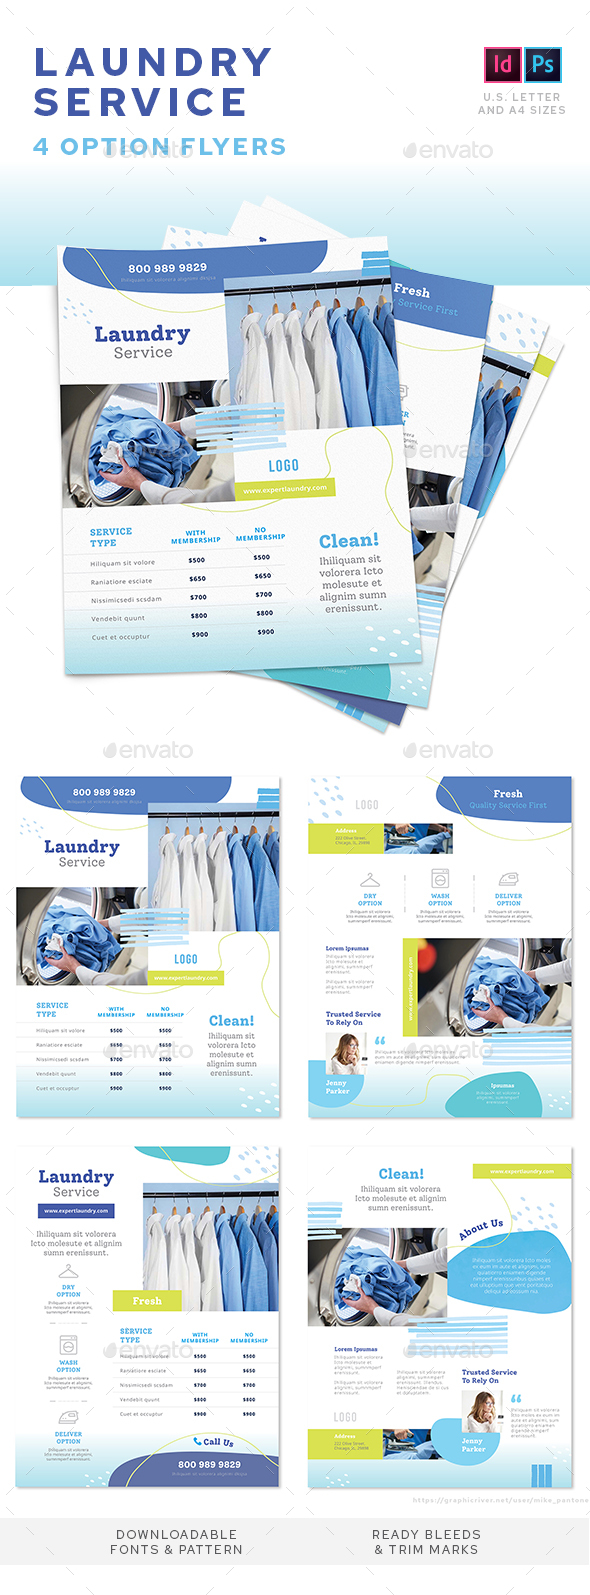 Laundry Service Flyers – 4 Options